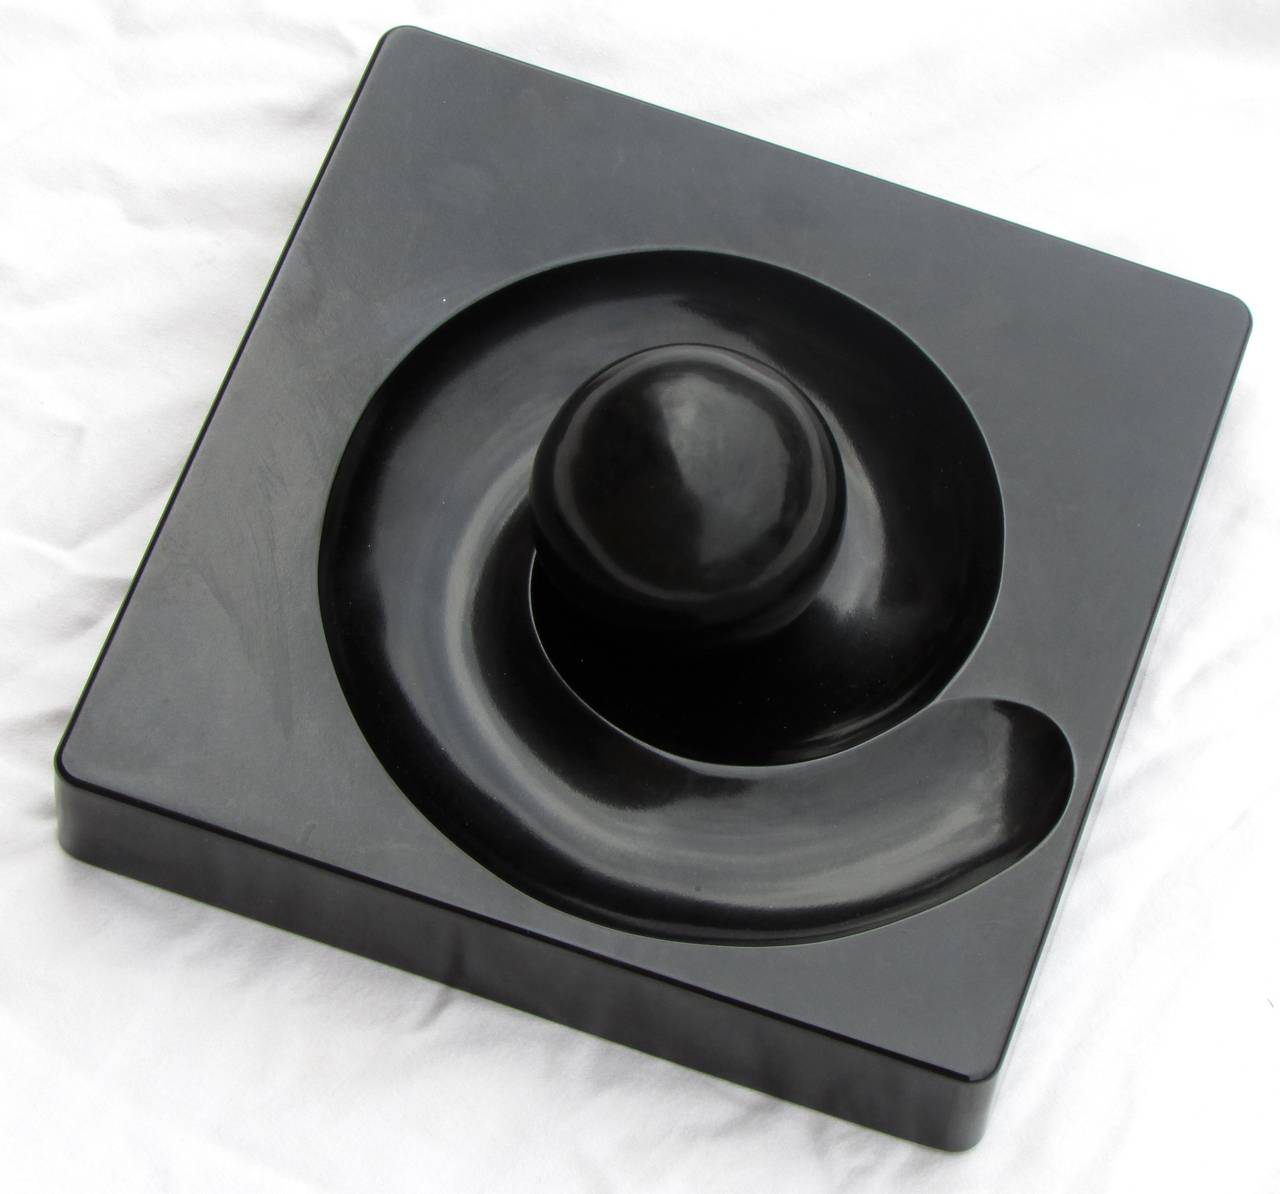 Black plastic ashtray with ball called "Spyros" designed by Elenore Peduzzi Riva for Artemide